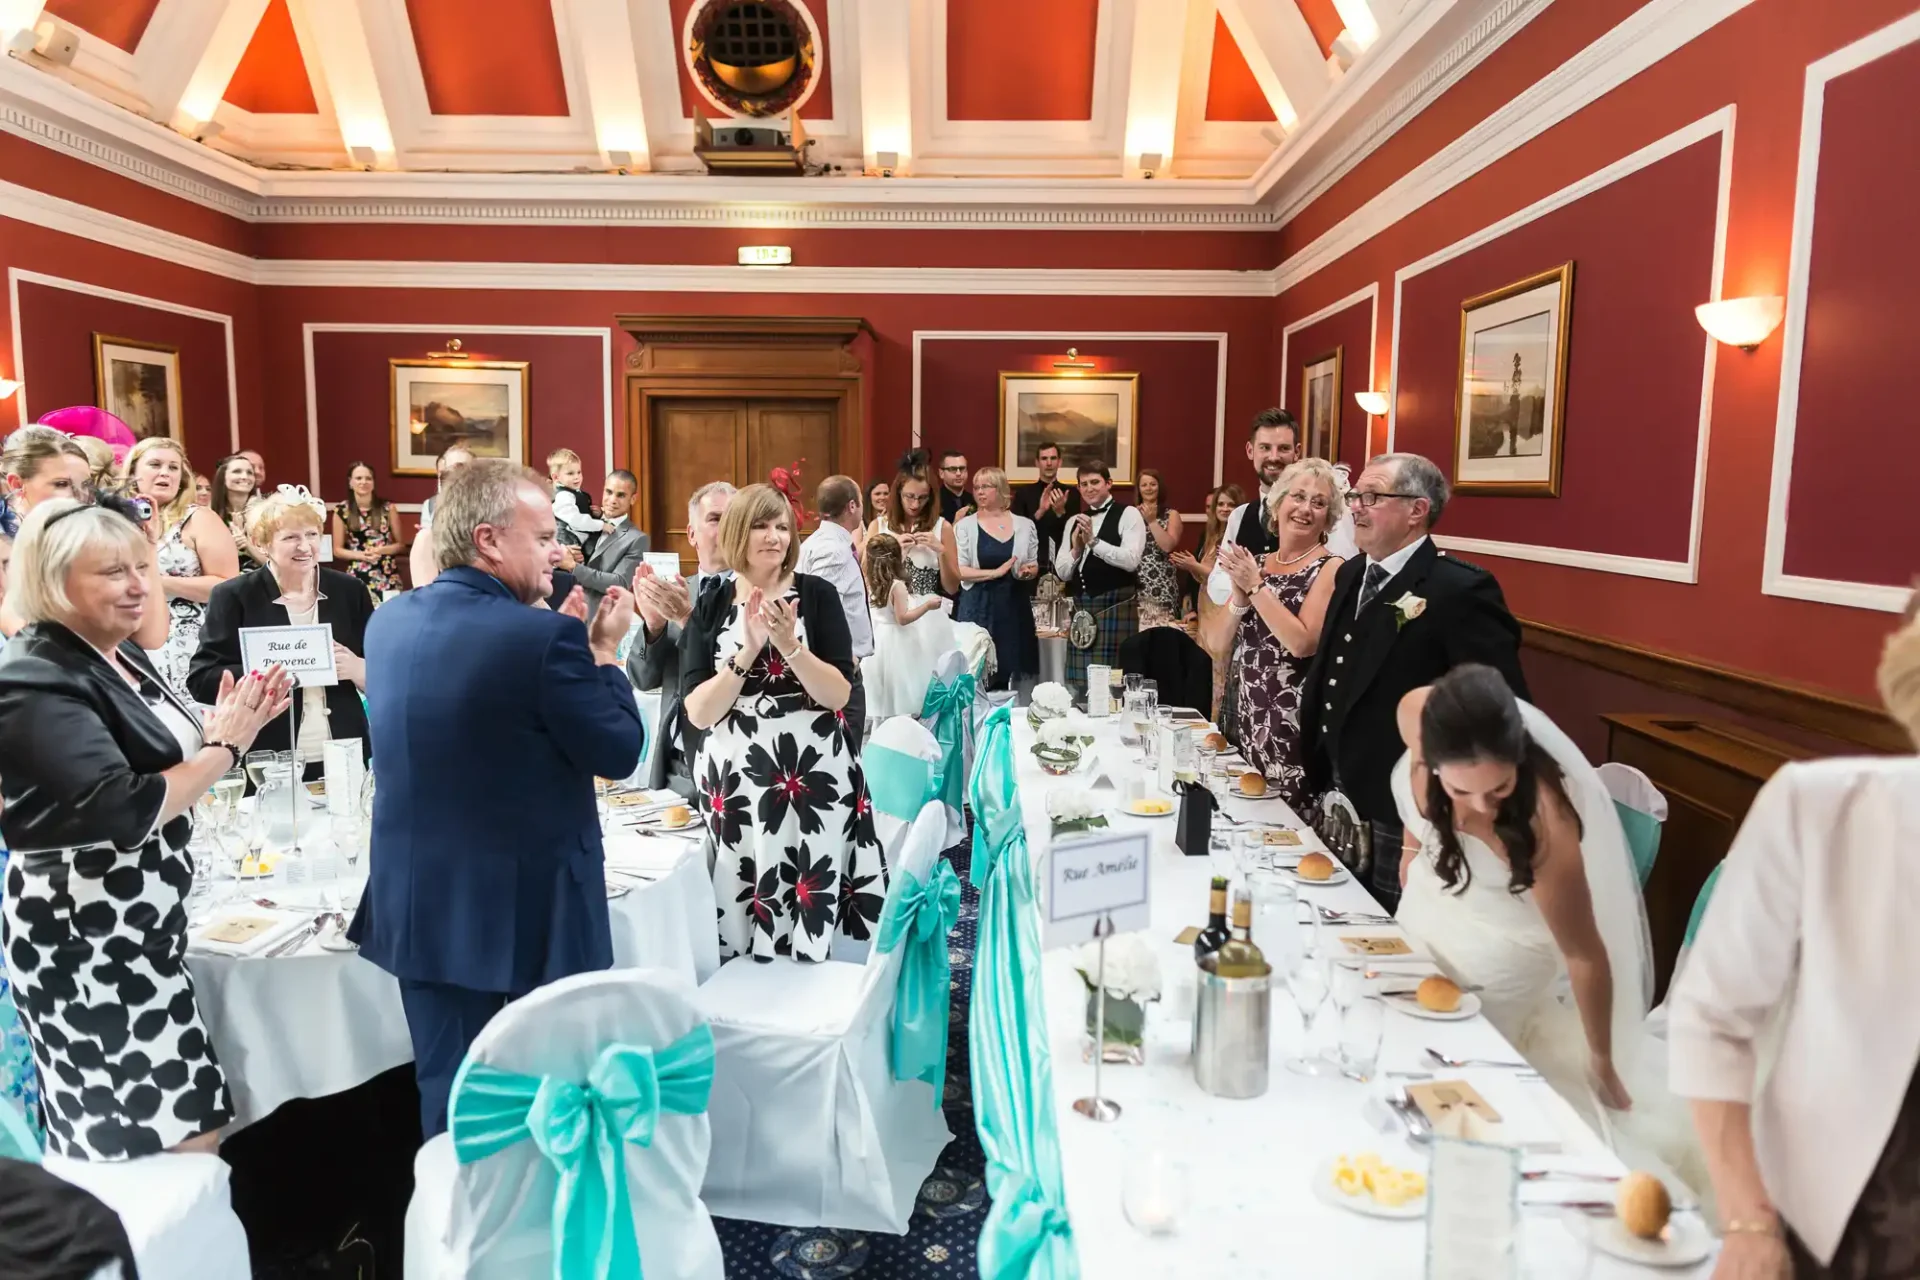 Wedding guests applauding as a couple walks through a dining hall decorated with teal accents.